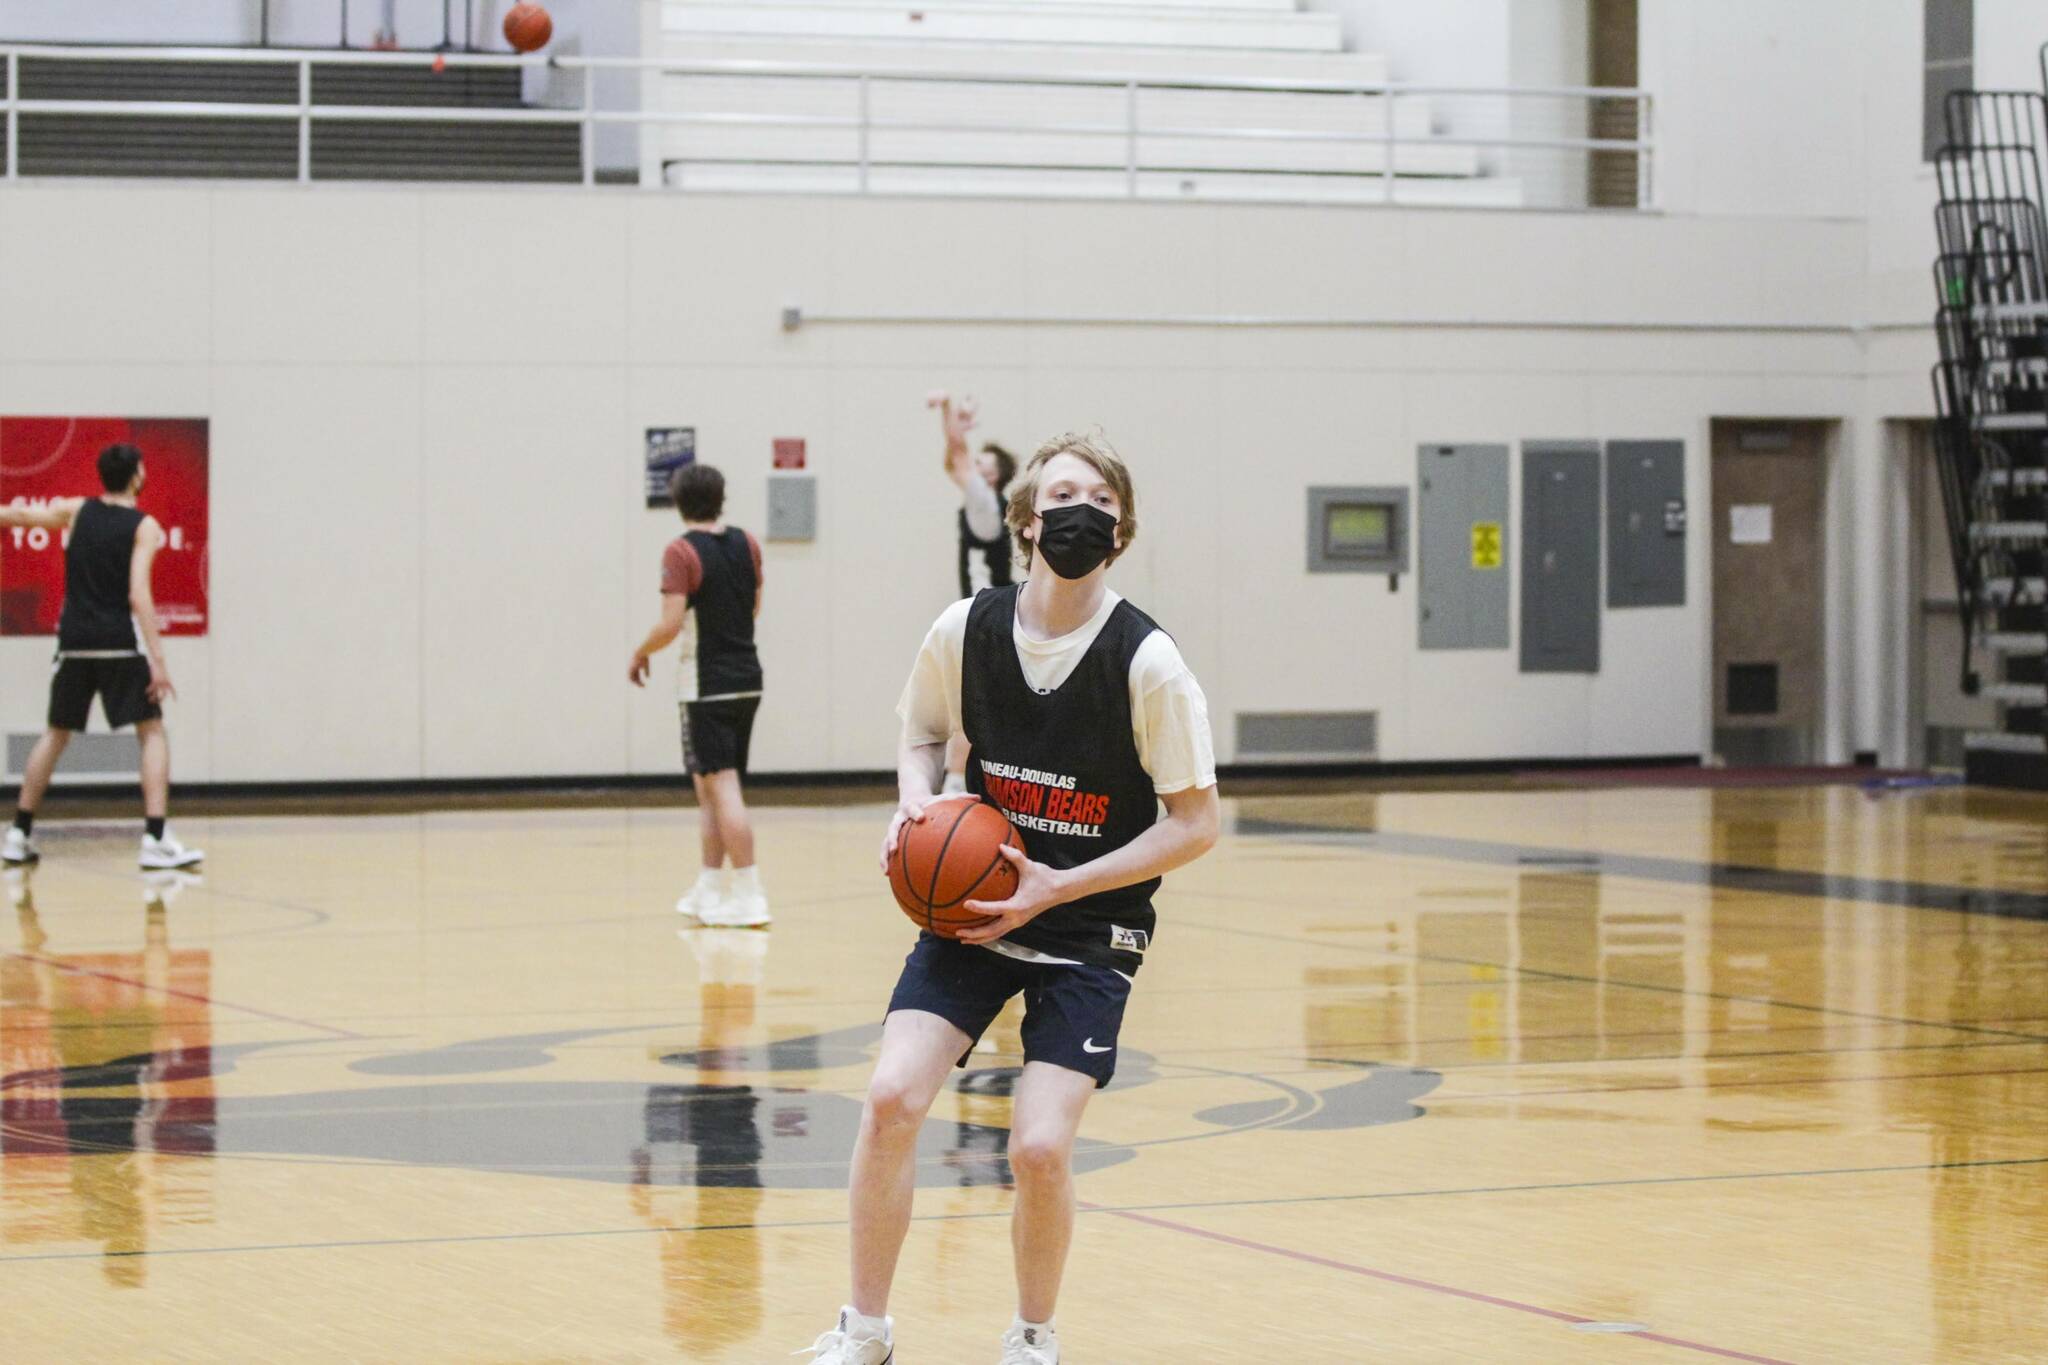 Sean Oliver, who led the Juneau-Douglas High School: Yadaa.at Kalé Crimson Bears in scoring at the Alaska Airlines Classic, prepares to shoot during practice on Dec. 15, 2021. (Michael S. Lockett / Juneau Empire File)